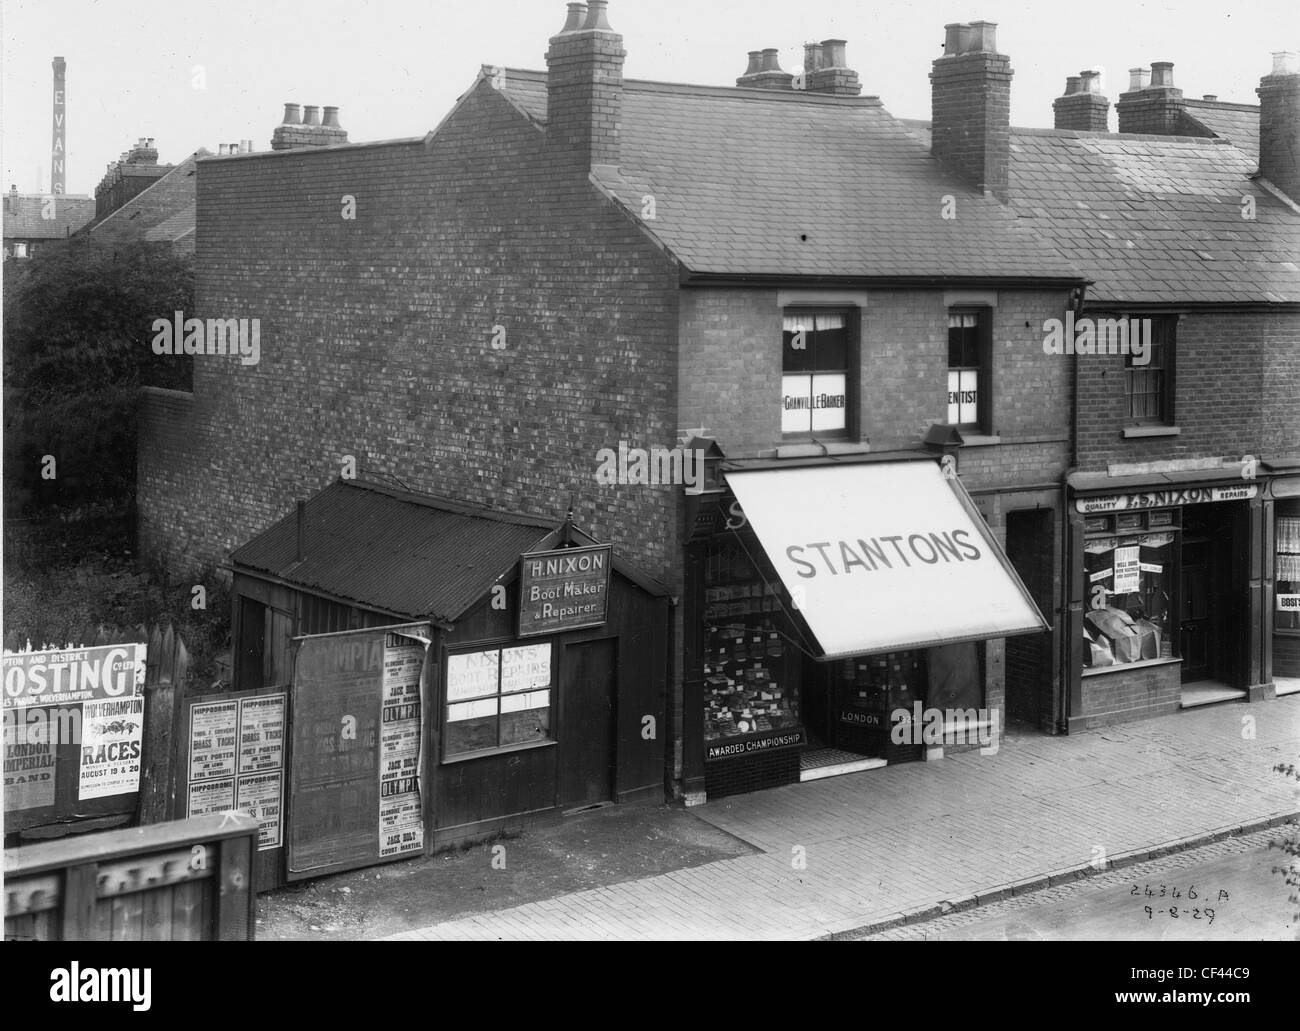 Shops in Market Street, Wolverhampton 1929. Shops include a boot maker and repairer; a shoe repairer, and a dentist. Stock Photo